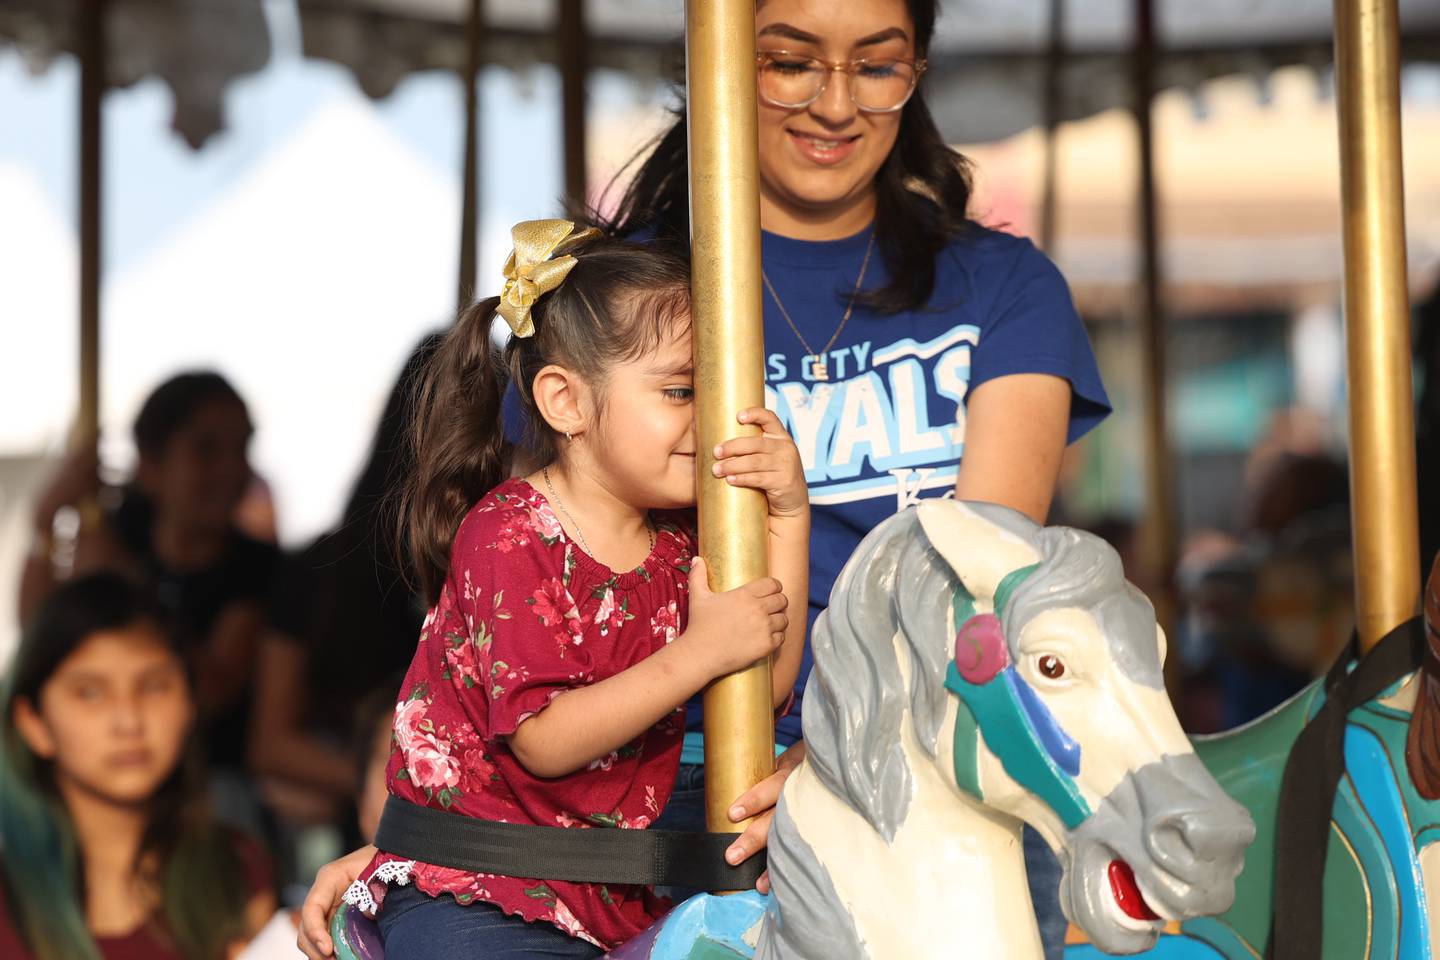 Emili Vieyra holds her daughter, Valentina as she rides the carousel on day 2 of the Taste of Joliet. Saturday, June 25, 2022 in Joliet.